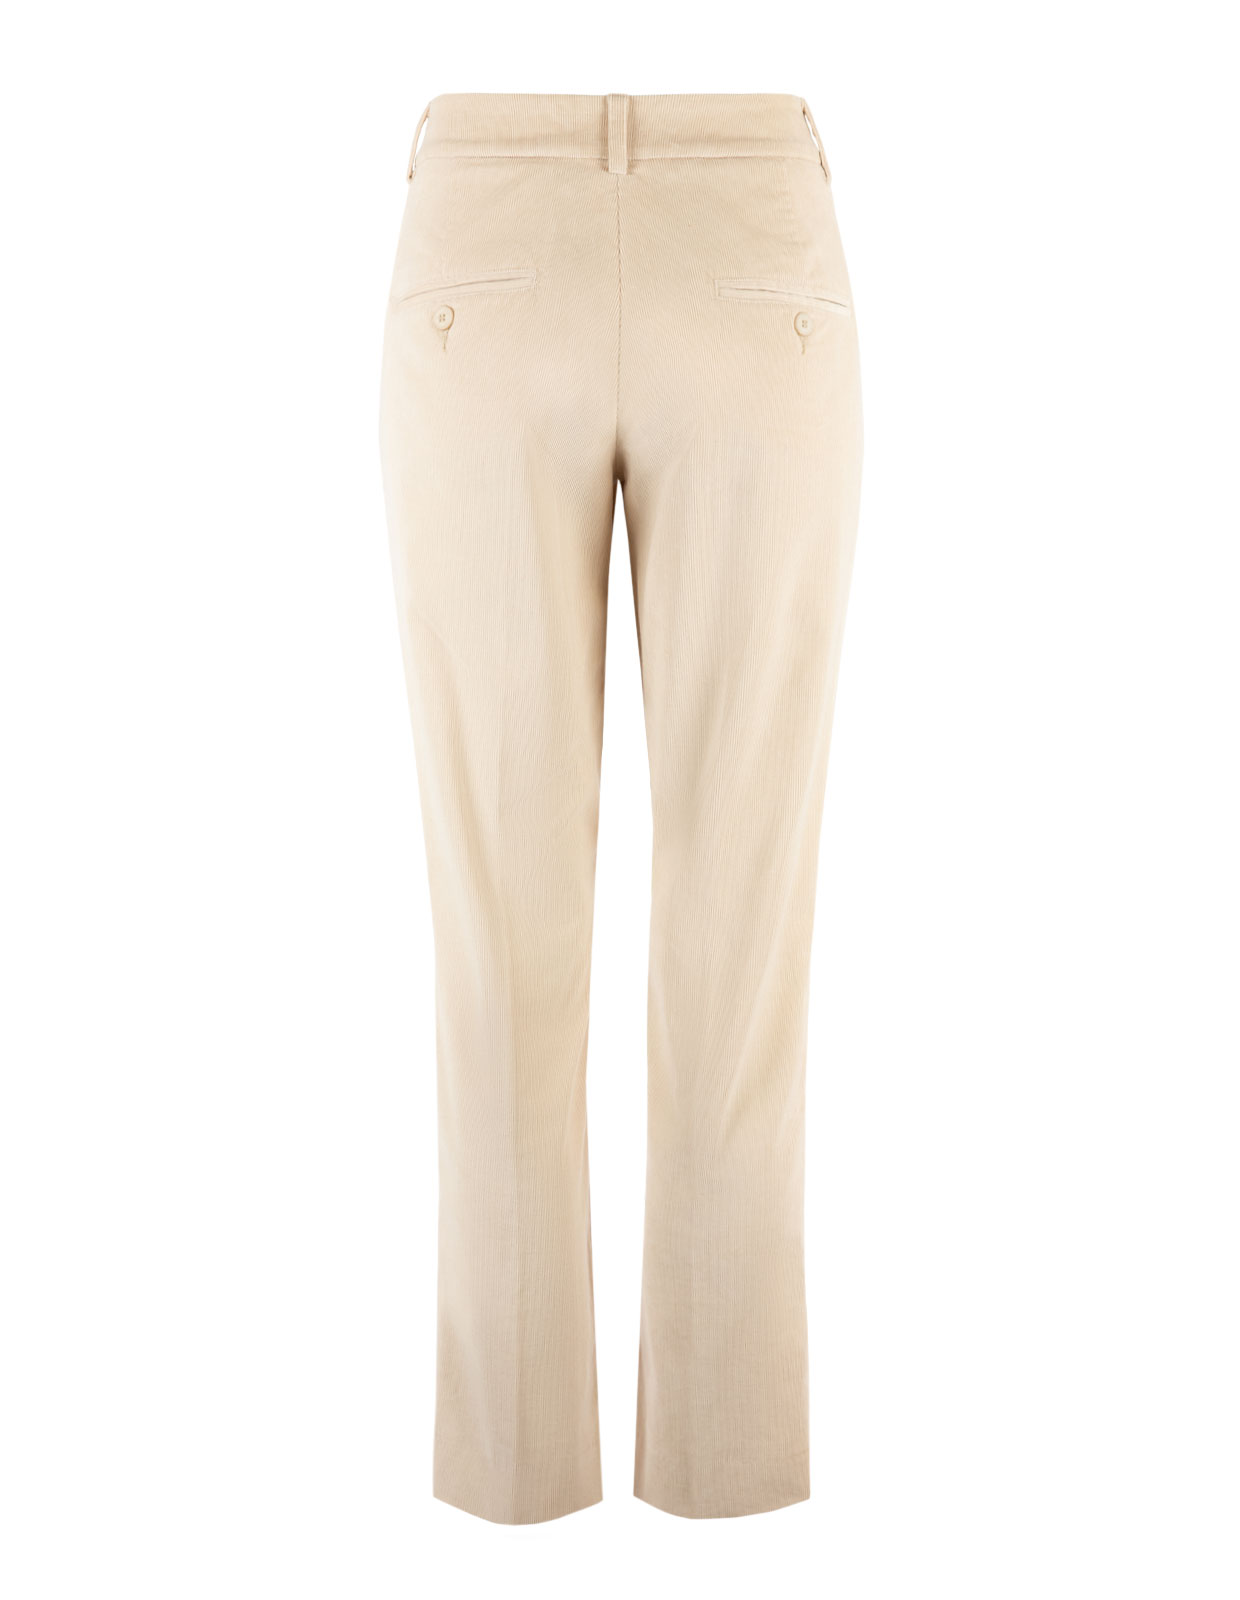 Fungo Cropped Cord Beige